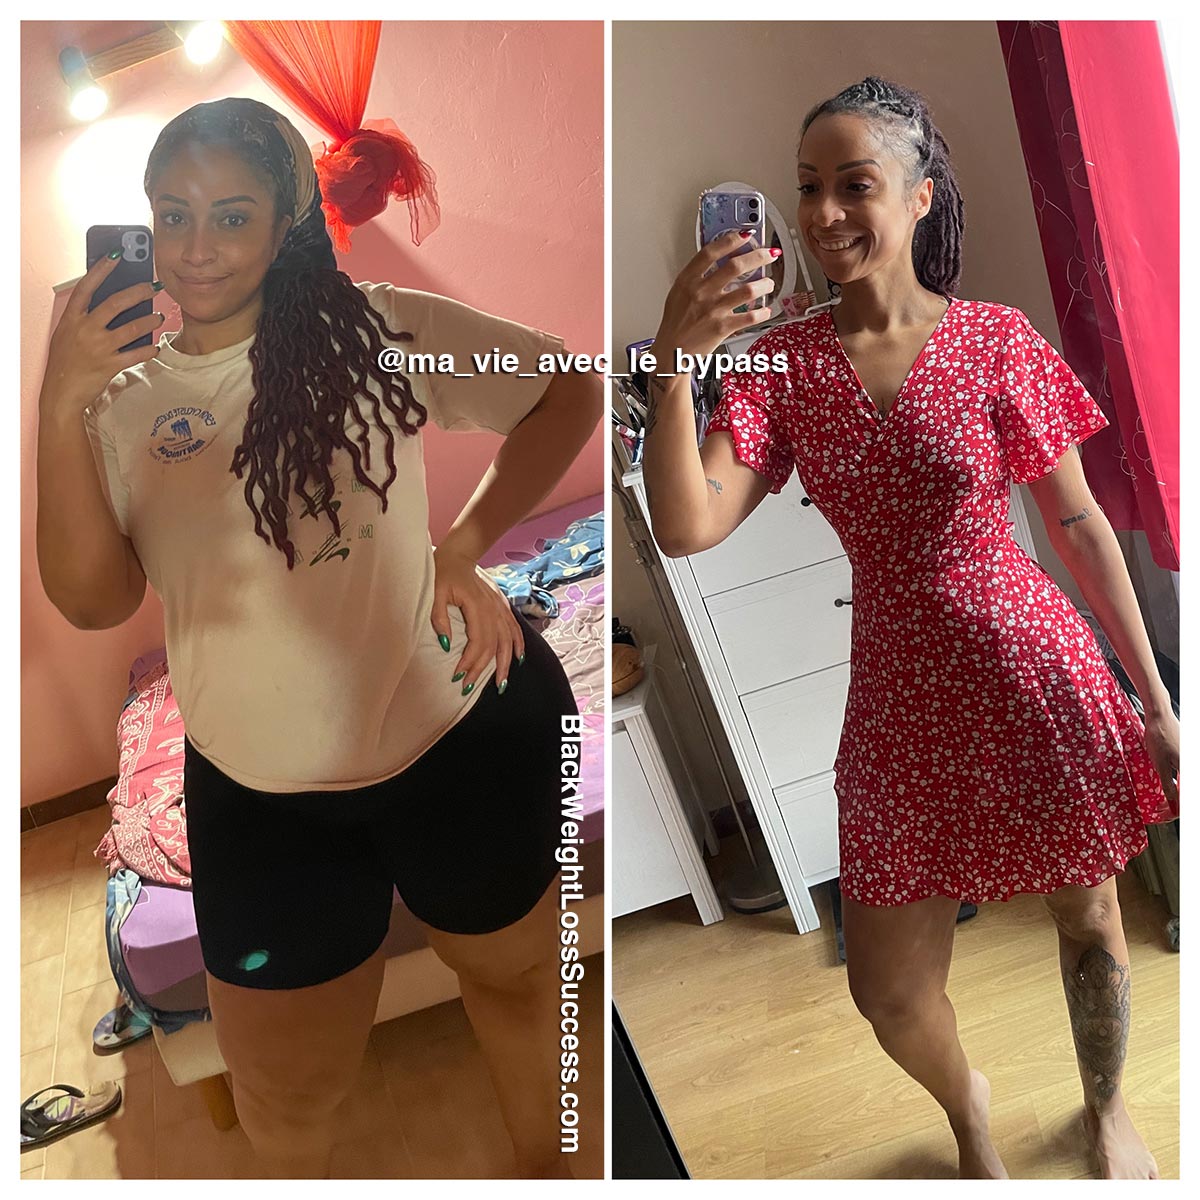 Axelle before and after weight loss